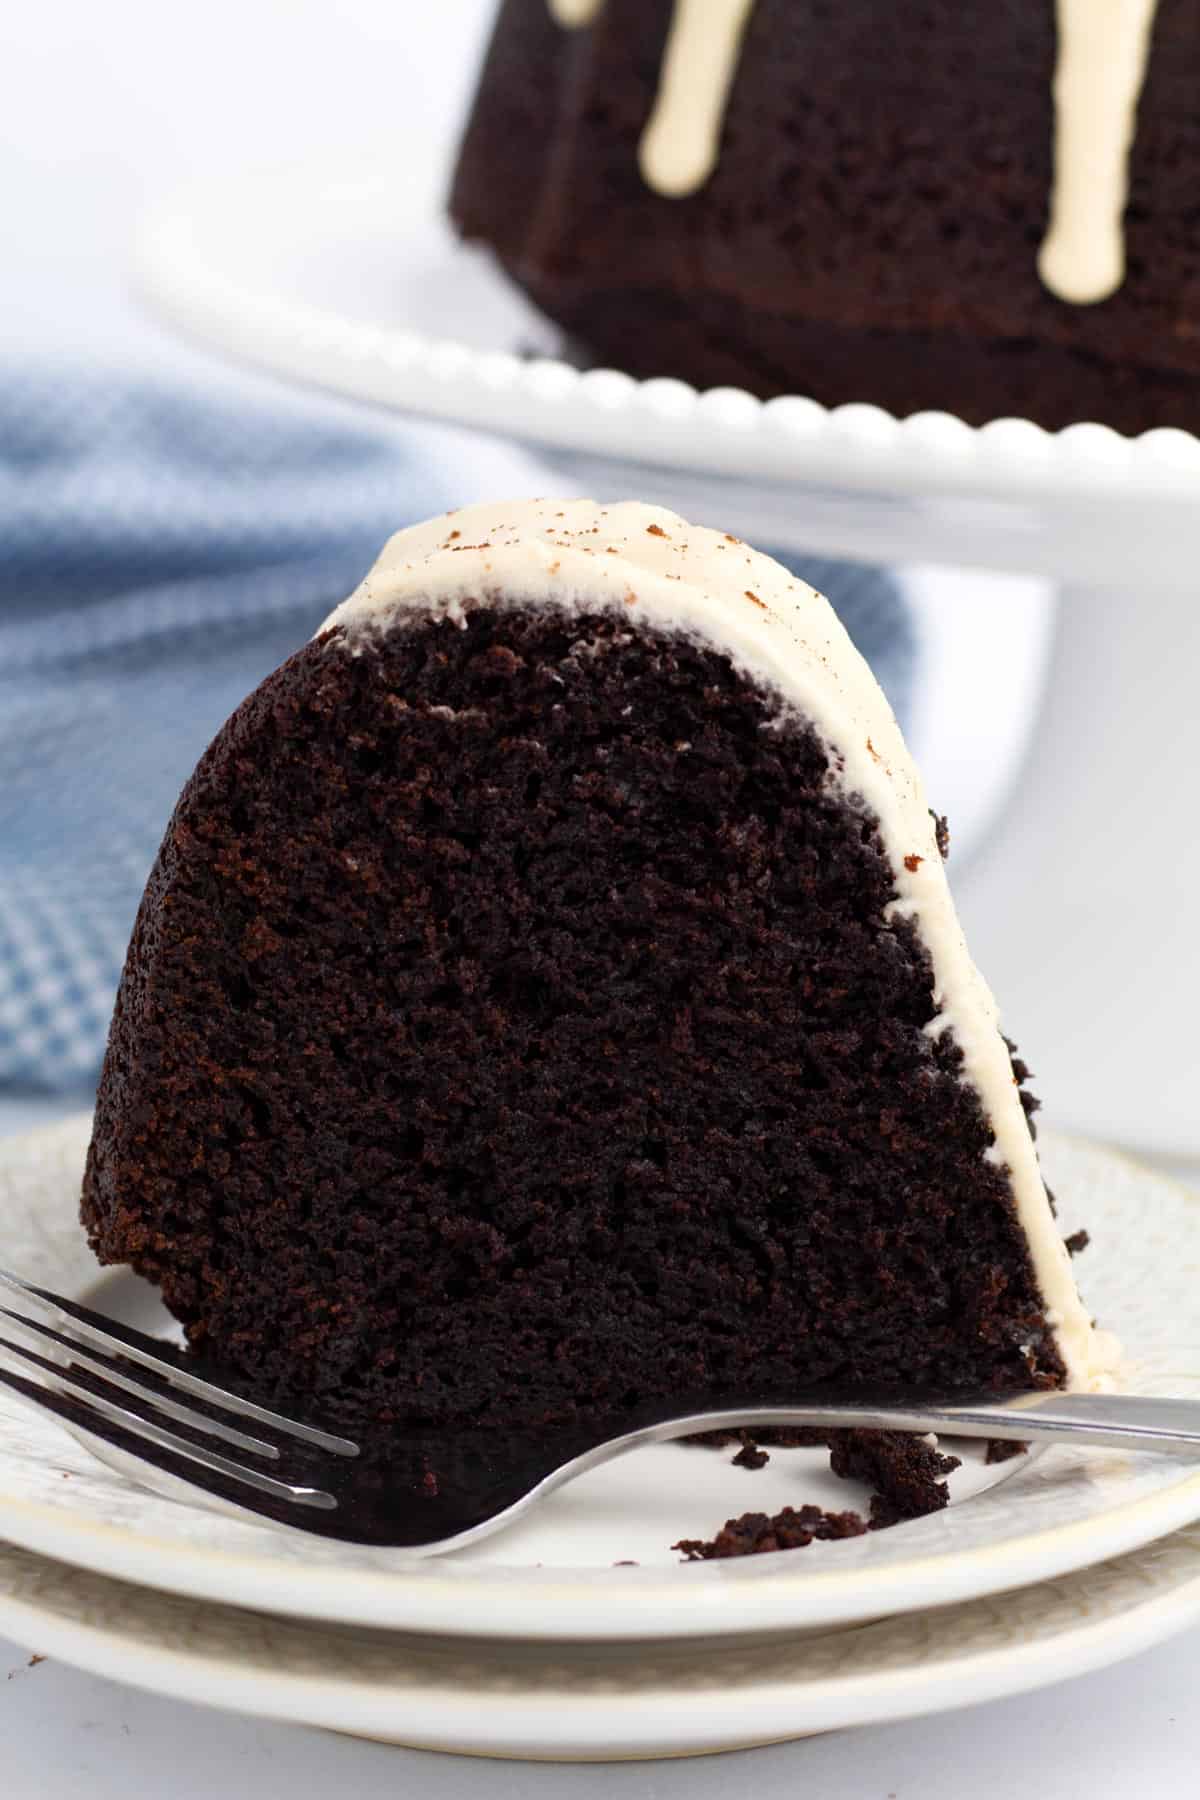 Slice of Kahlua cake on a stack of plates with a fork resting in front and the bundt cake on a cake stand in the background.